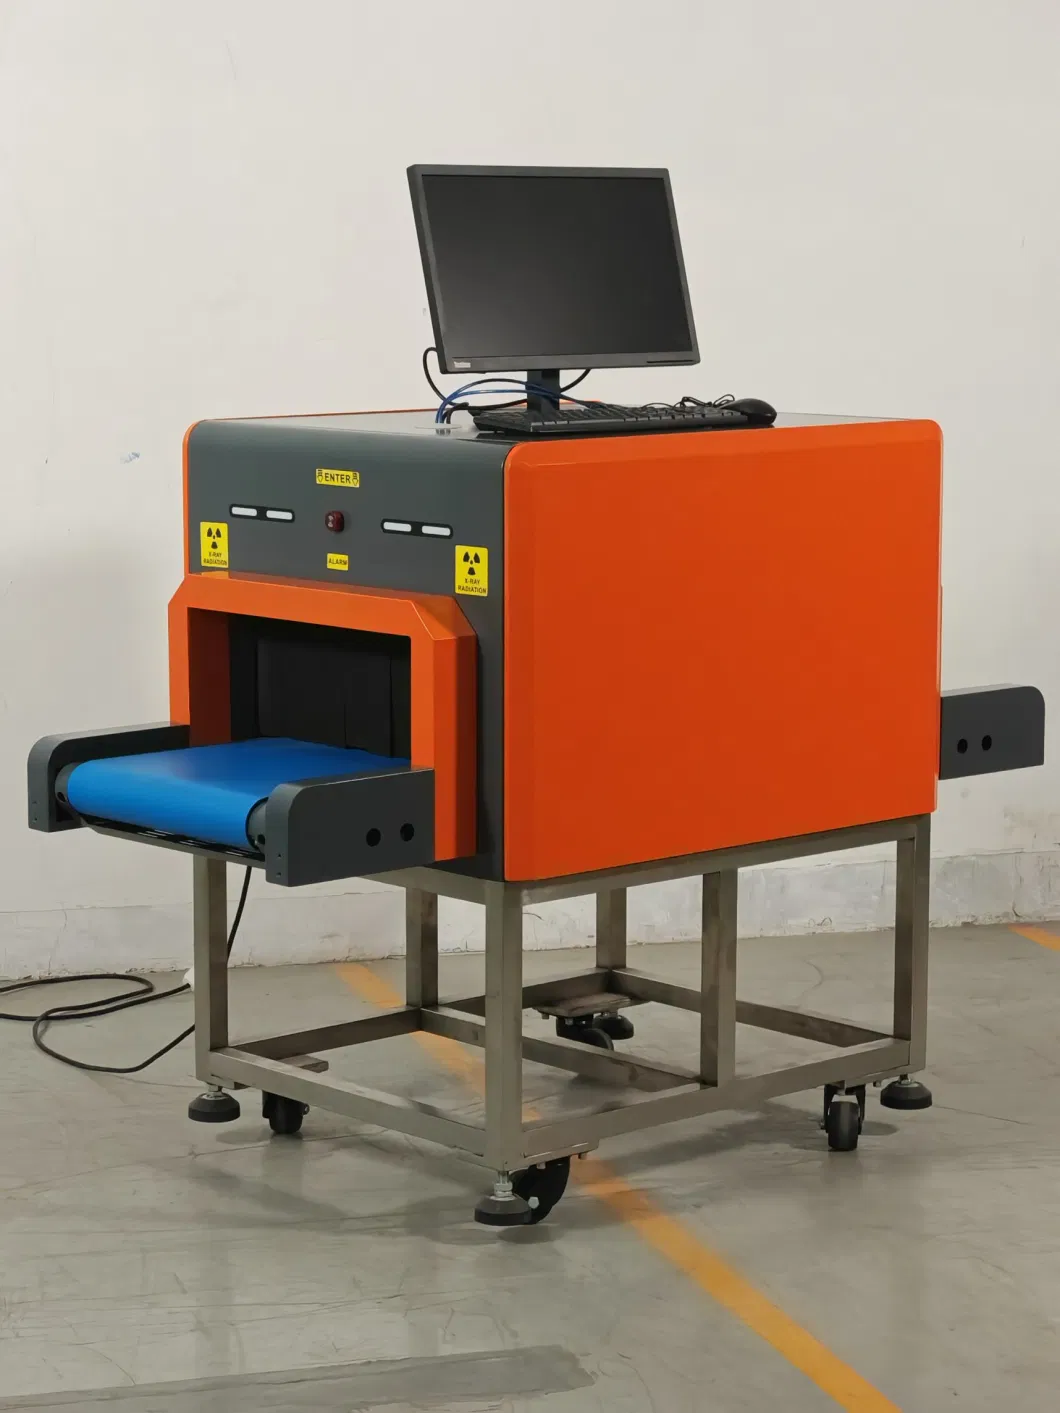 Commercial X-ray Bag Scanner 4233 for School Baggage Screening